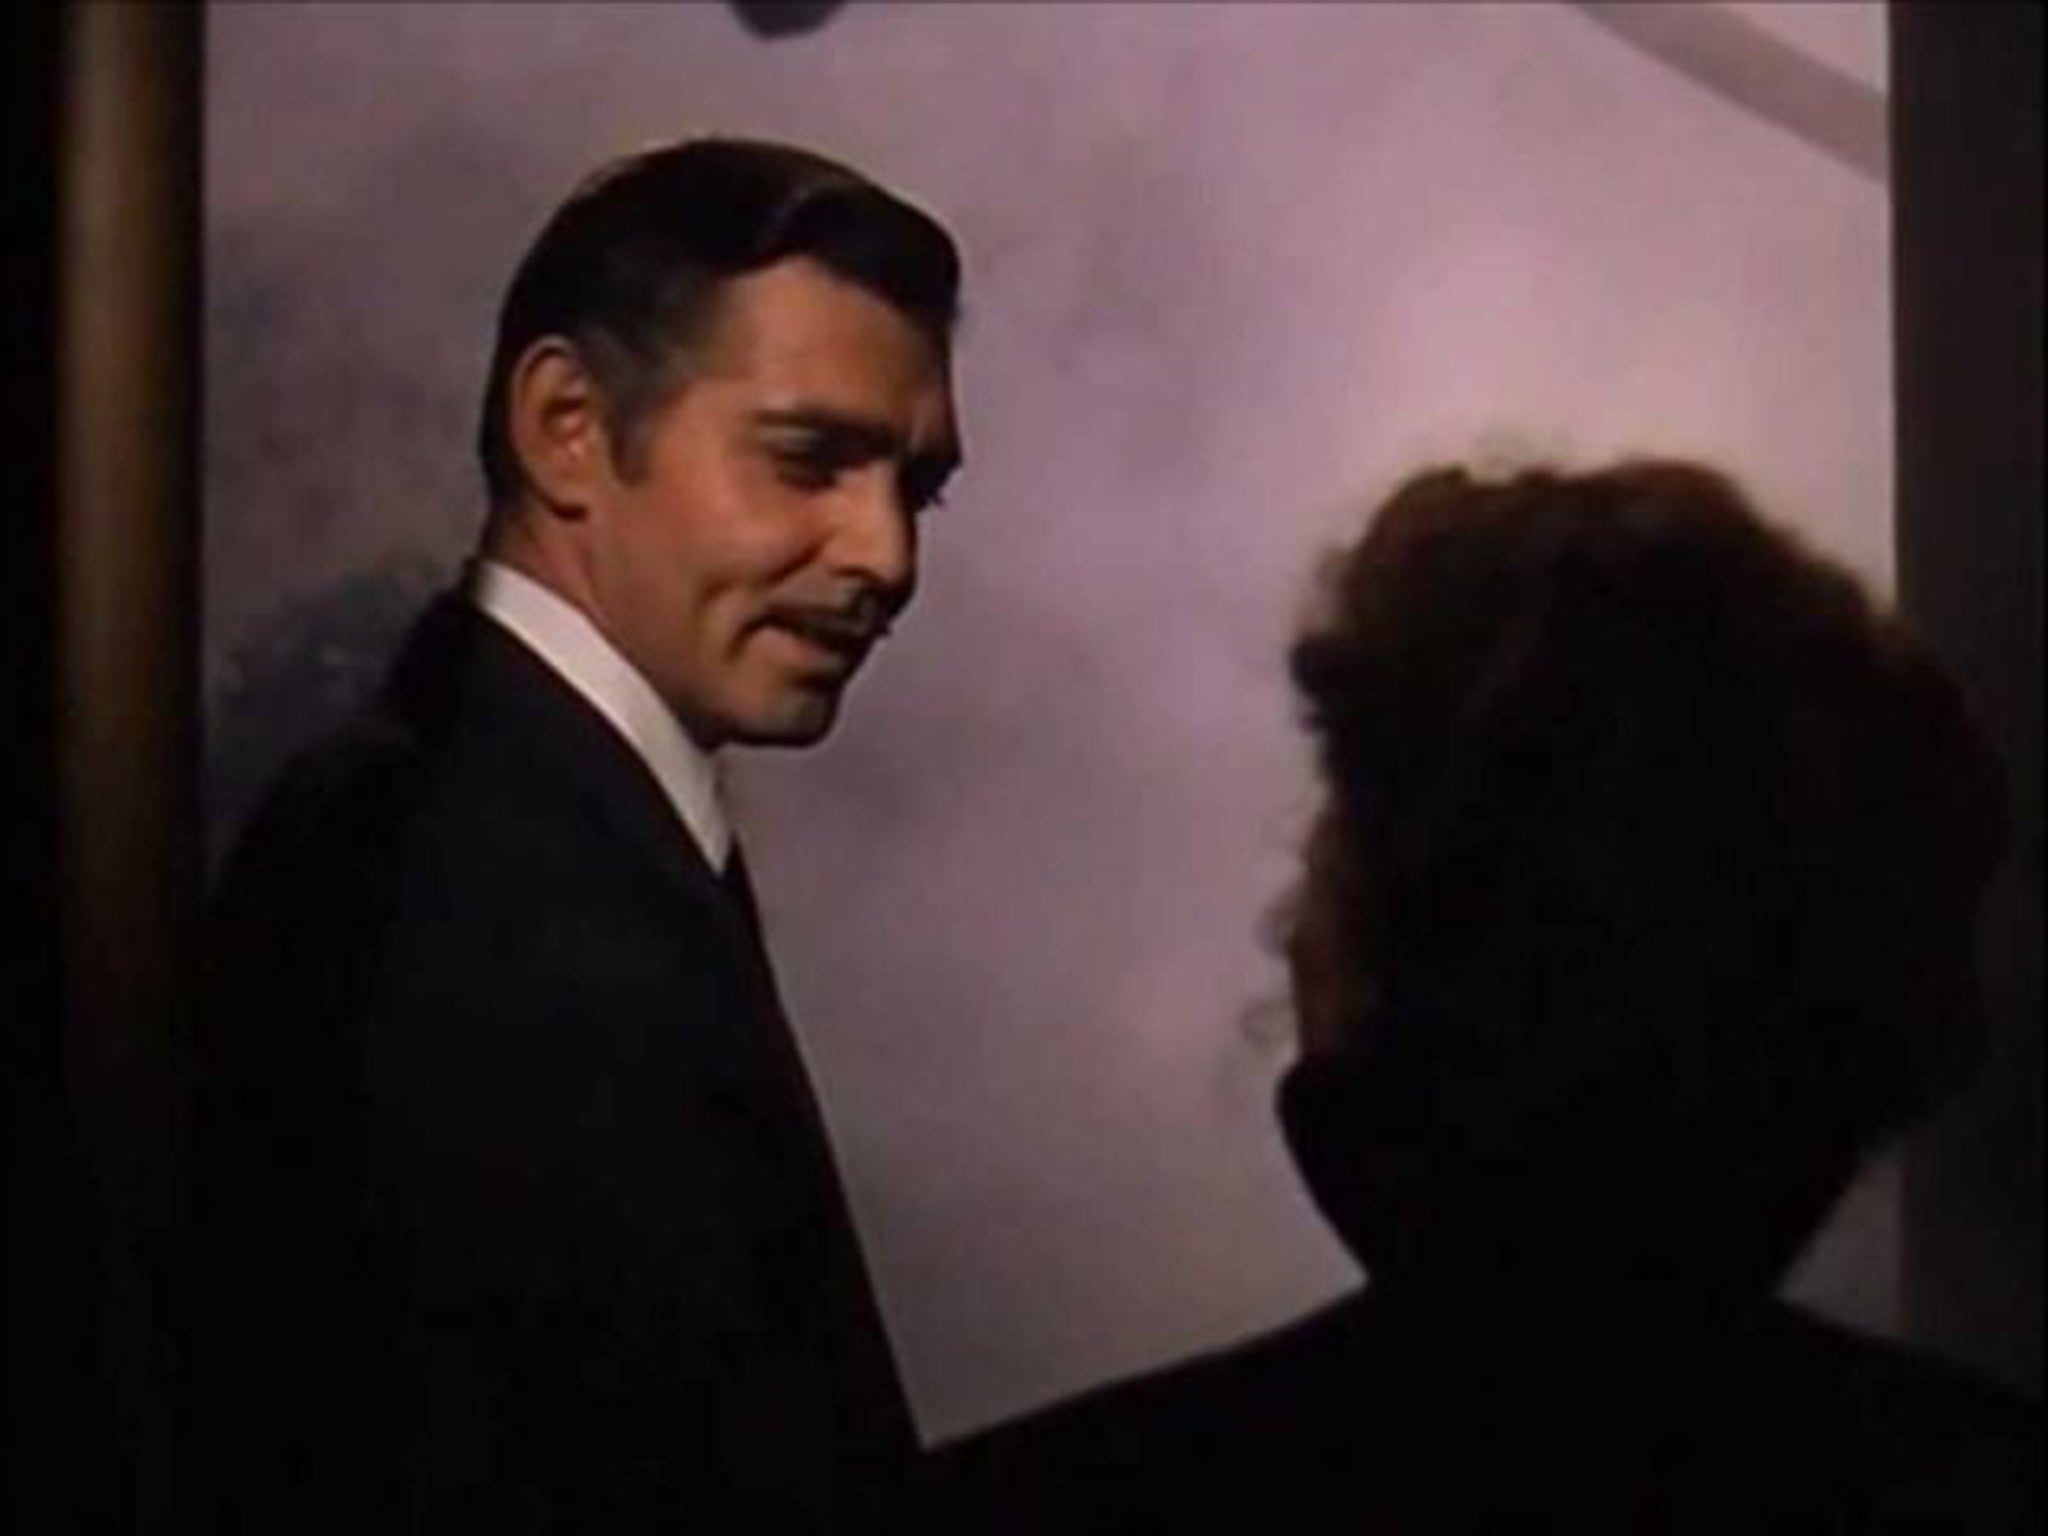 Clark Gable, as Rhett Butler, famously spoke the line: "Frankly, my dear, I don’t give a damn". At that time, the word was still censored as profane by Hollywood